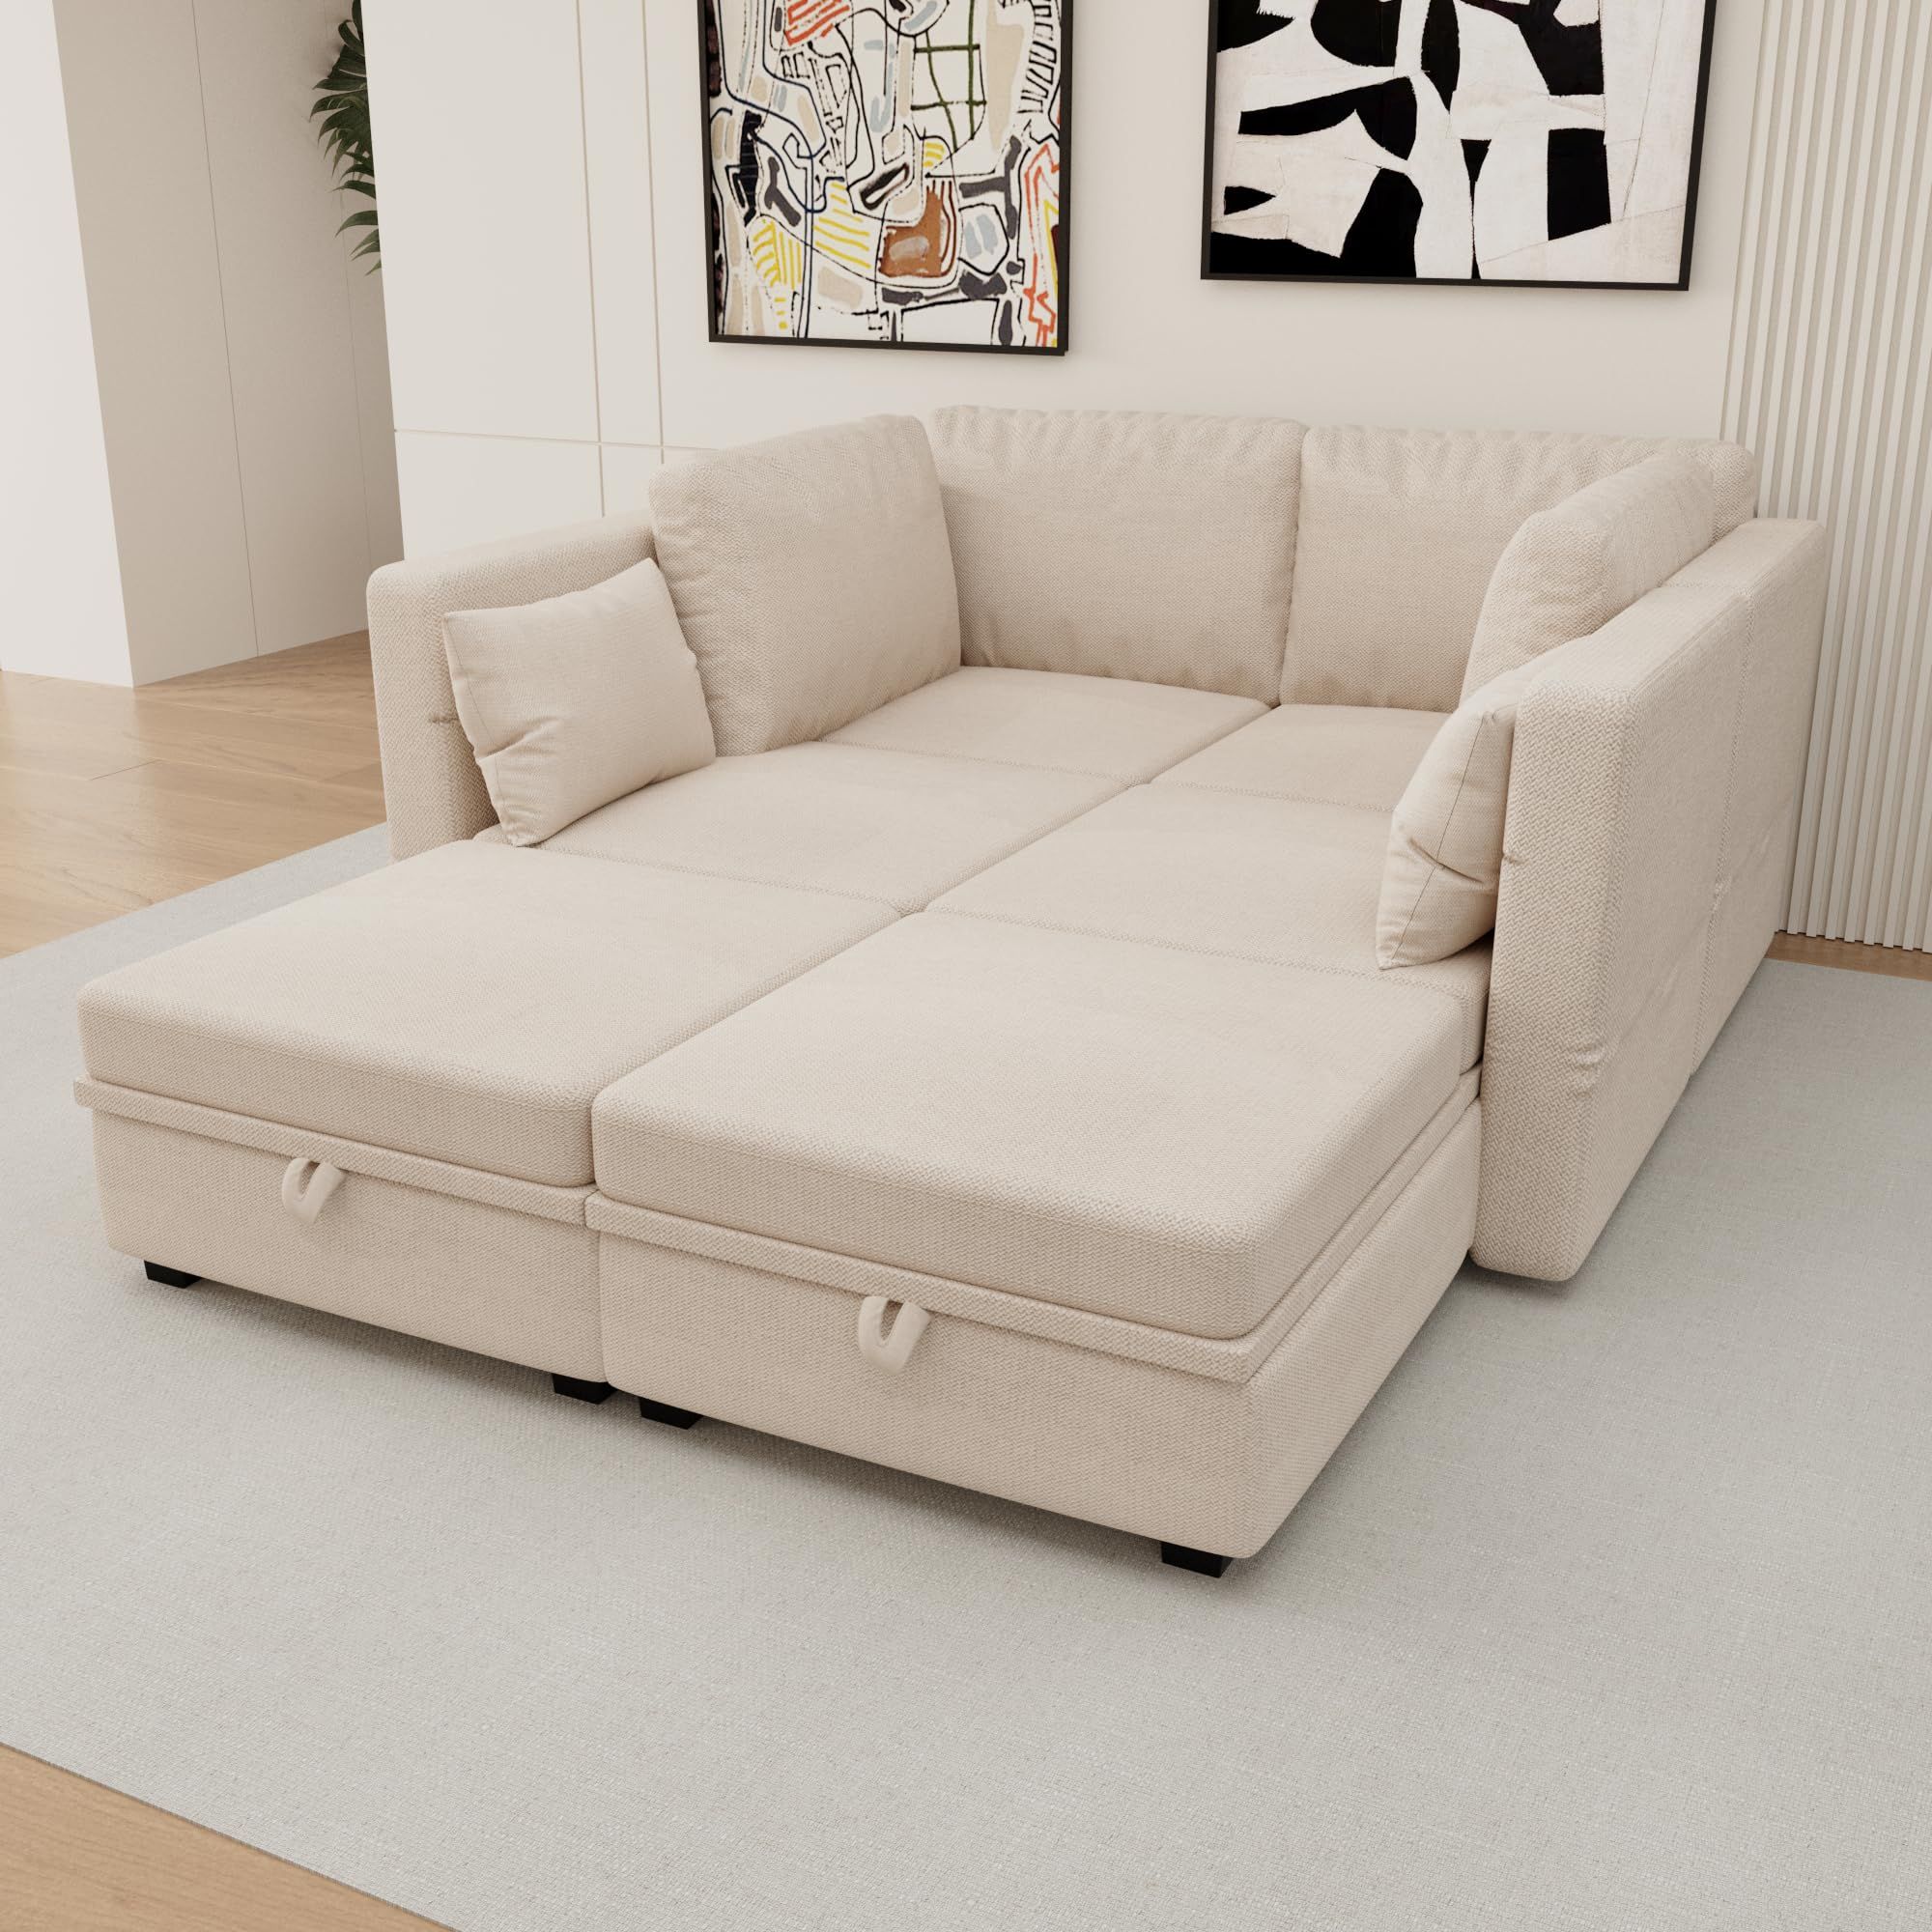 Importance of U-shaped sofa in the
furniture market